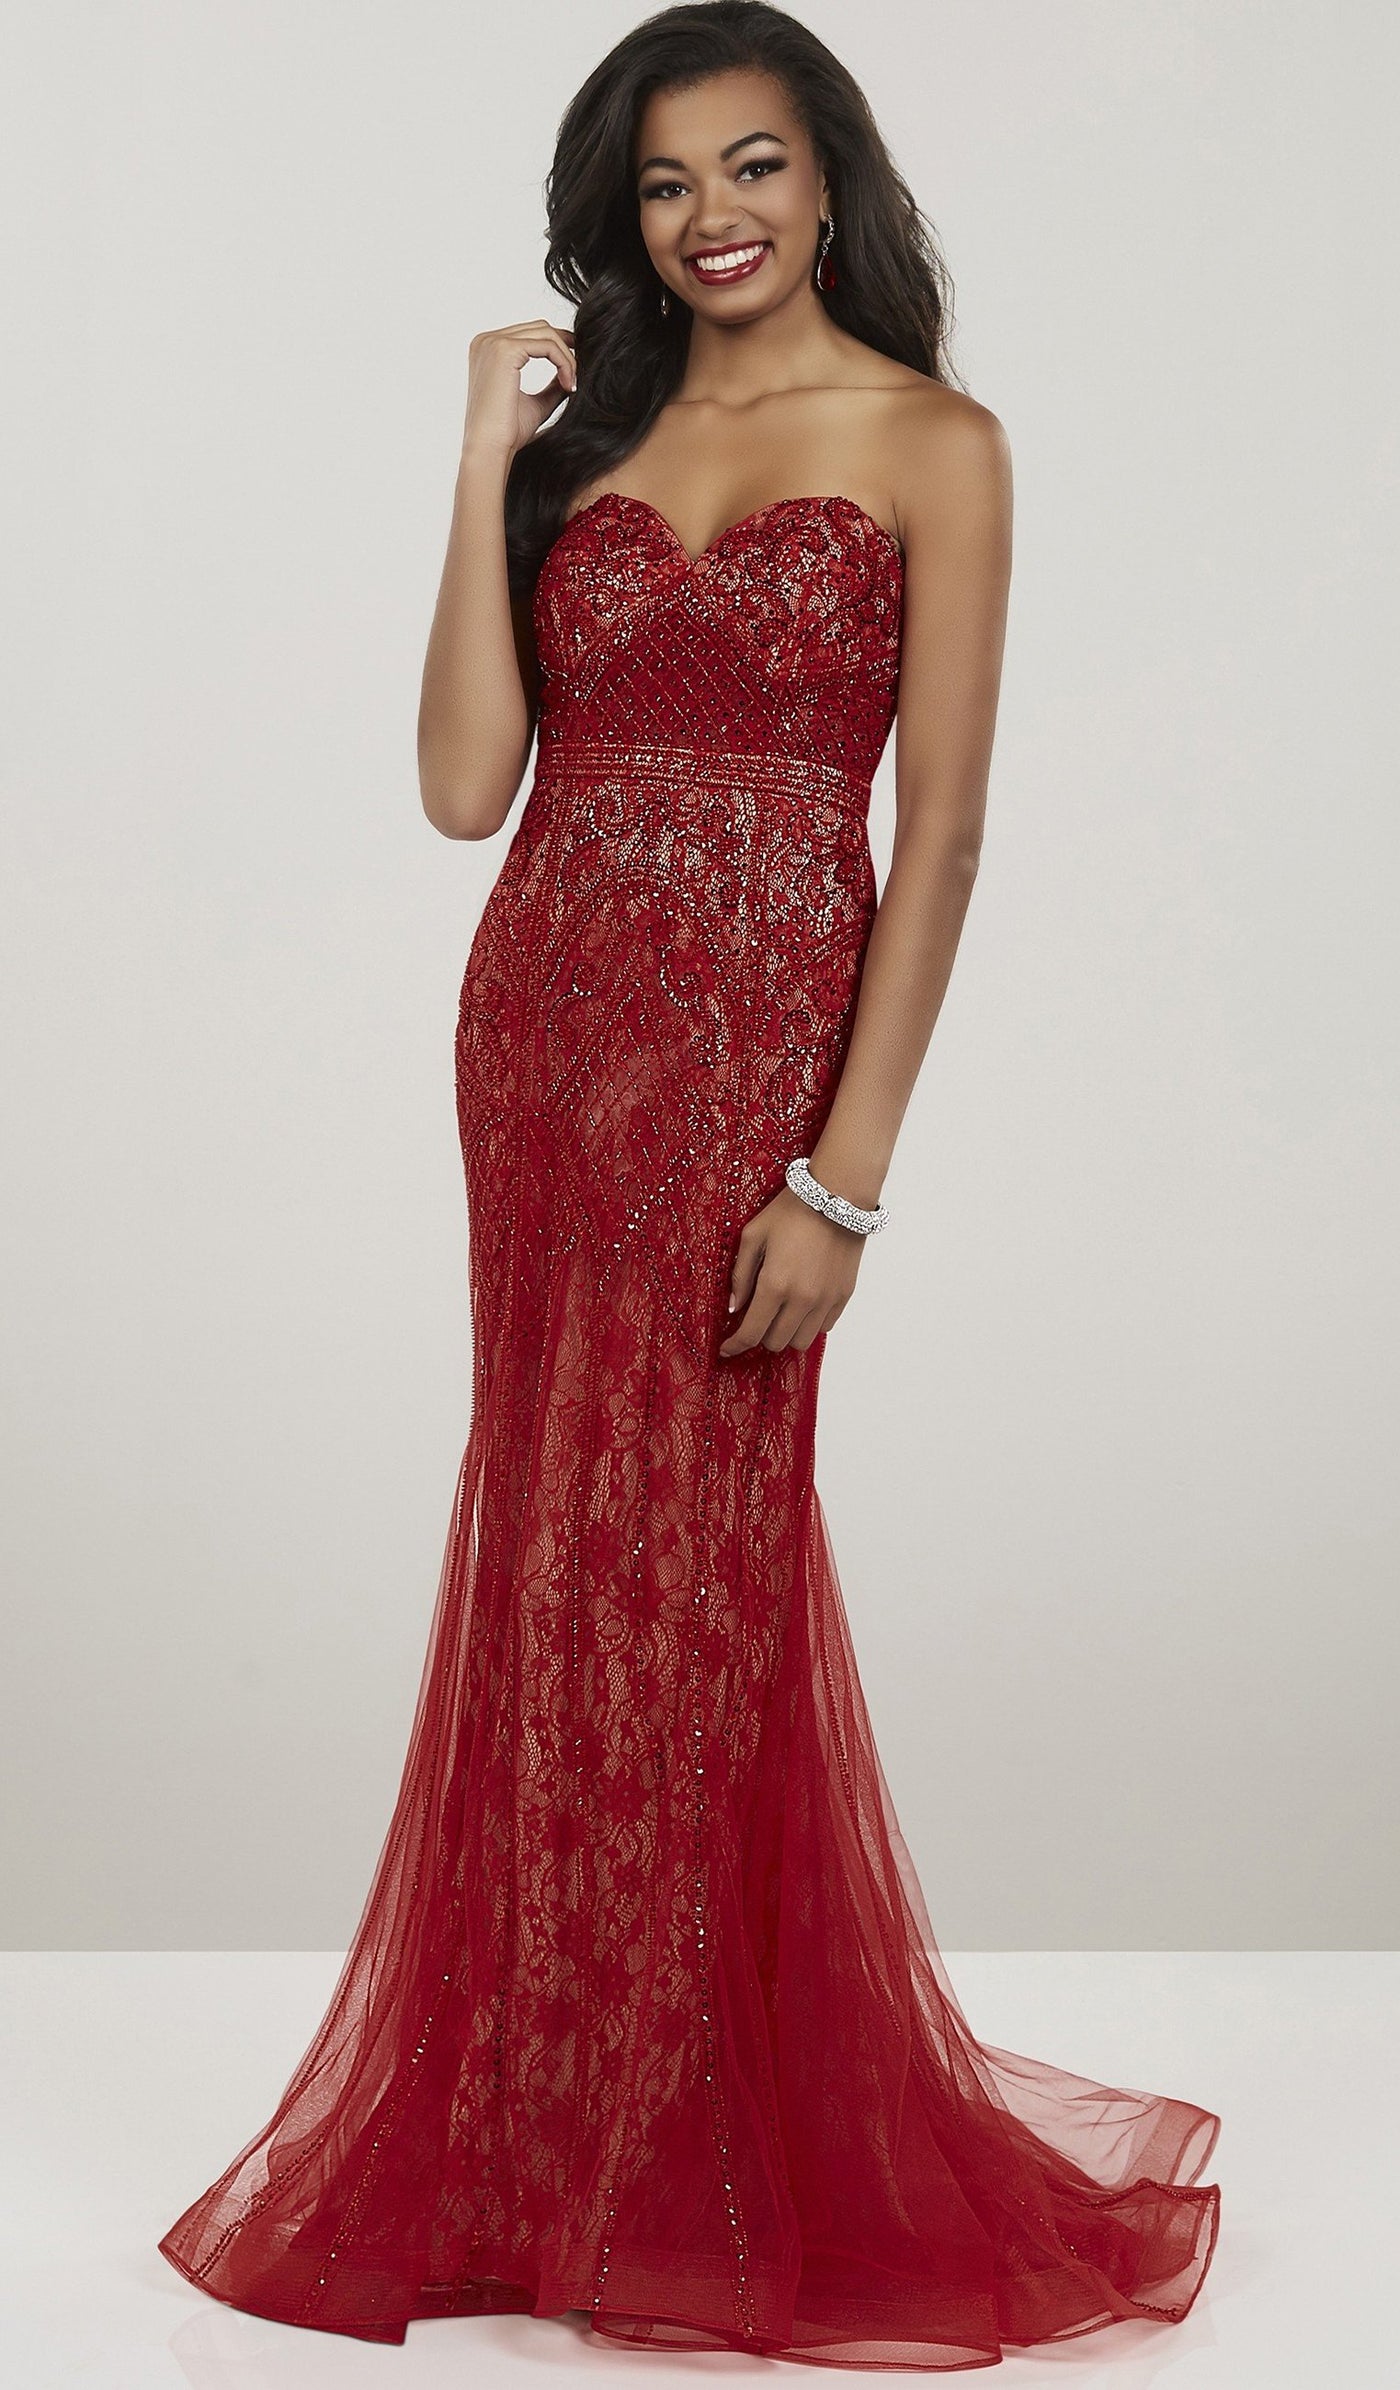 Panoply - 14930 Beaded Lace Sweetheart Trumpet Dress In Red and Neutral